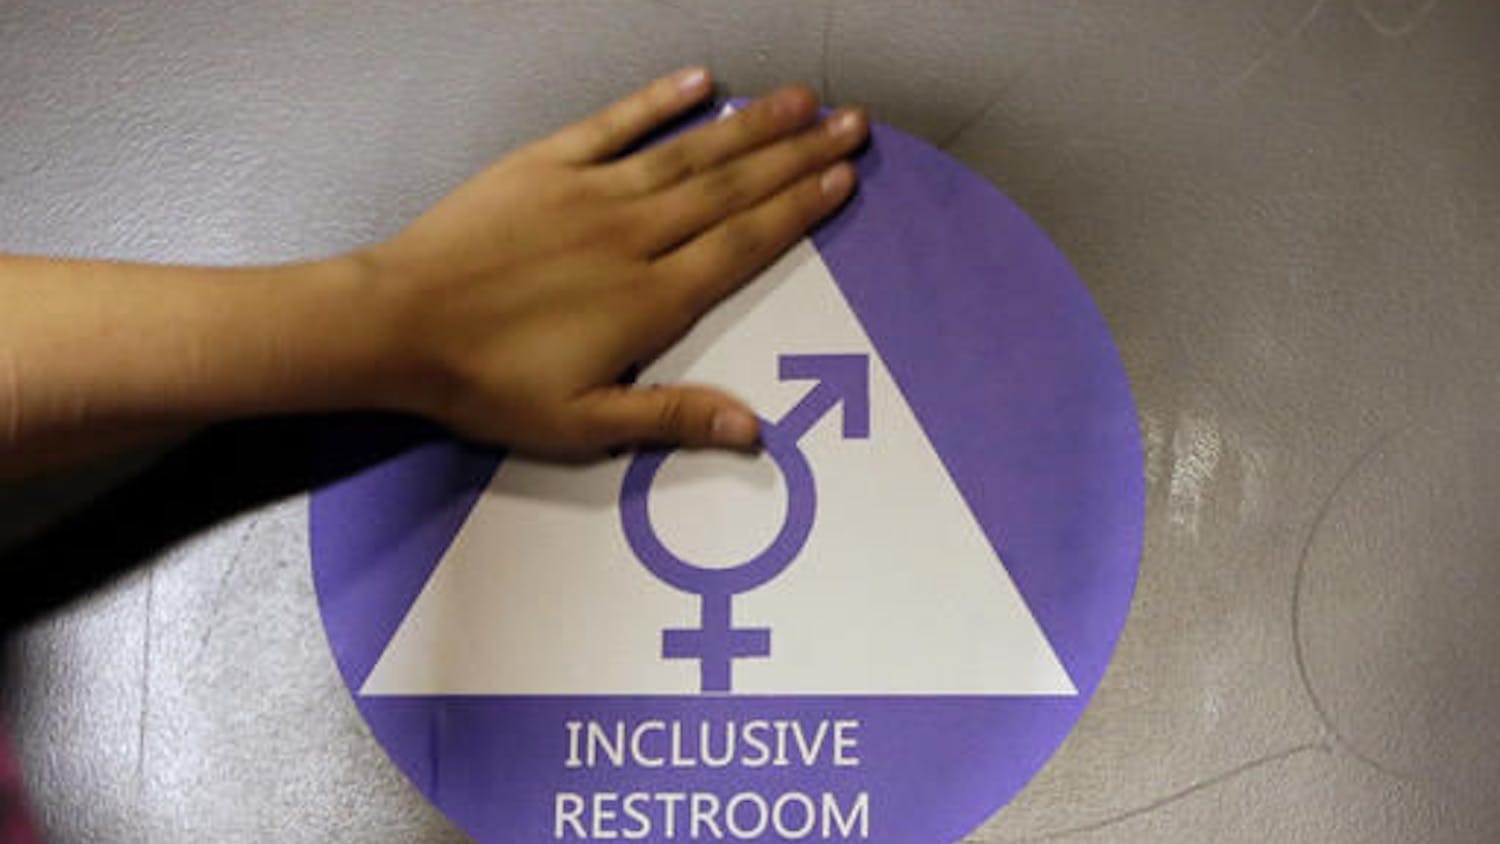 In this May 17, 2016 file photo, a new sticker is placed on the door at the ceremonial opening of a gender neutral bathroom at Nathan Hale High School in Seattle. A government official says the Trump administration will revoke guidelines that say transgender students should be allowed to use bathrooms and locker rooms matching their chosen gender identity.